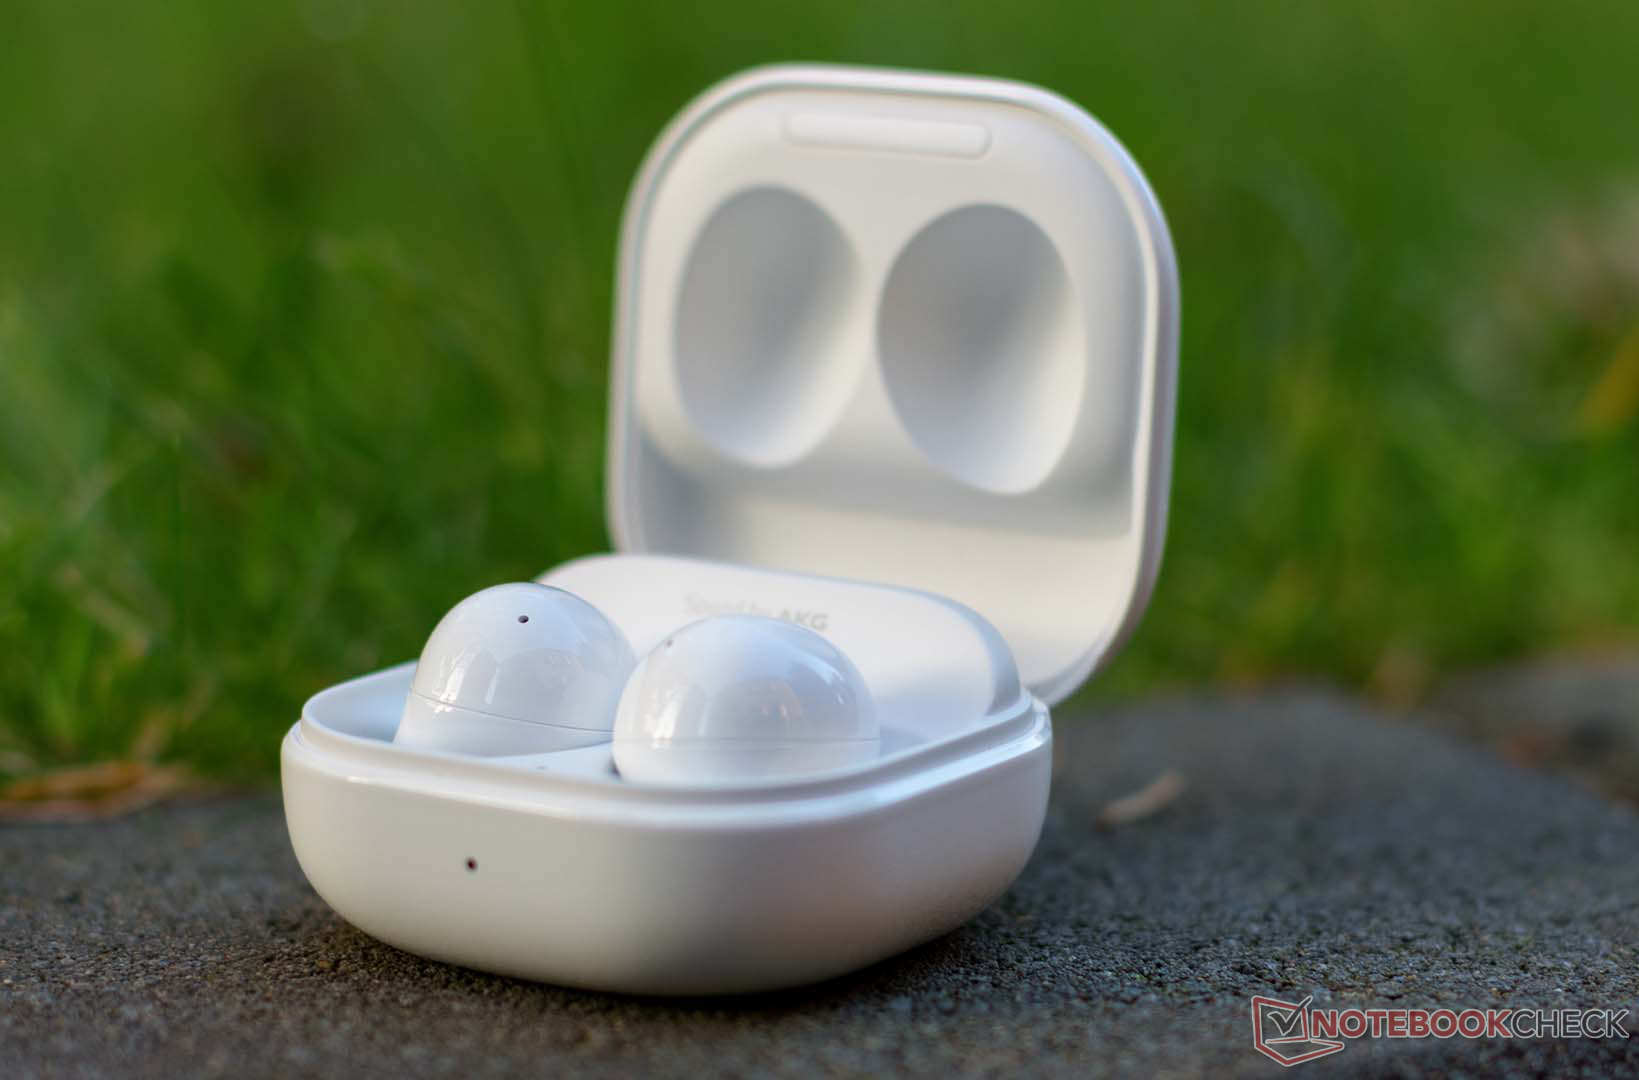 Samsung Galaxy Buds FE: First Fan Edition earbuds leak with